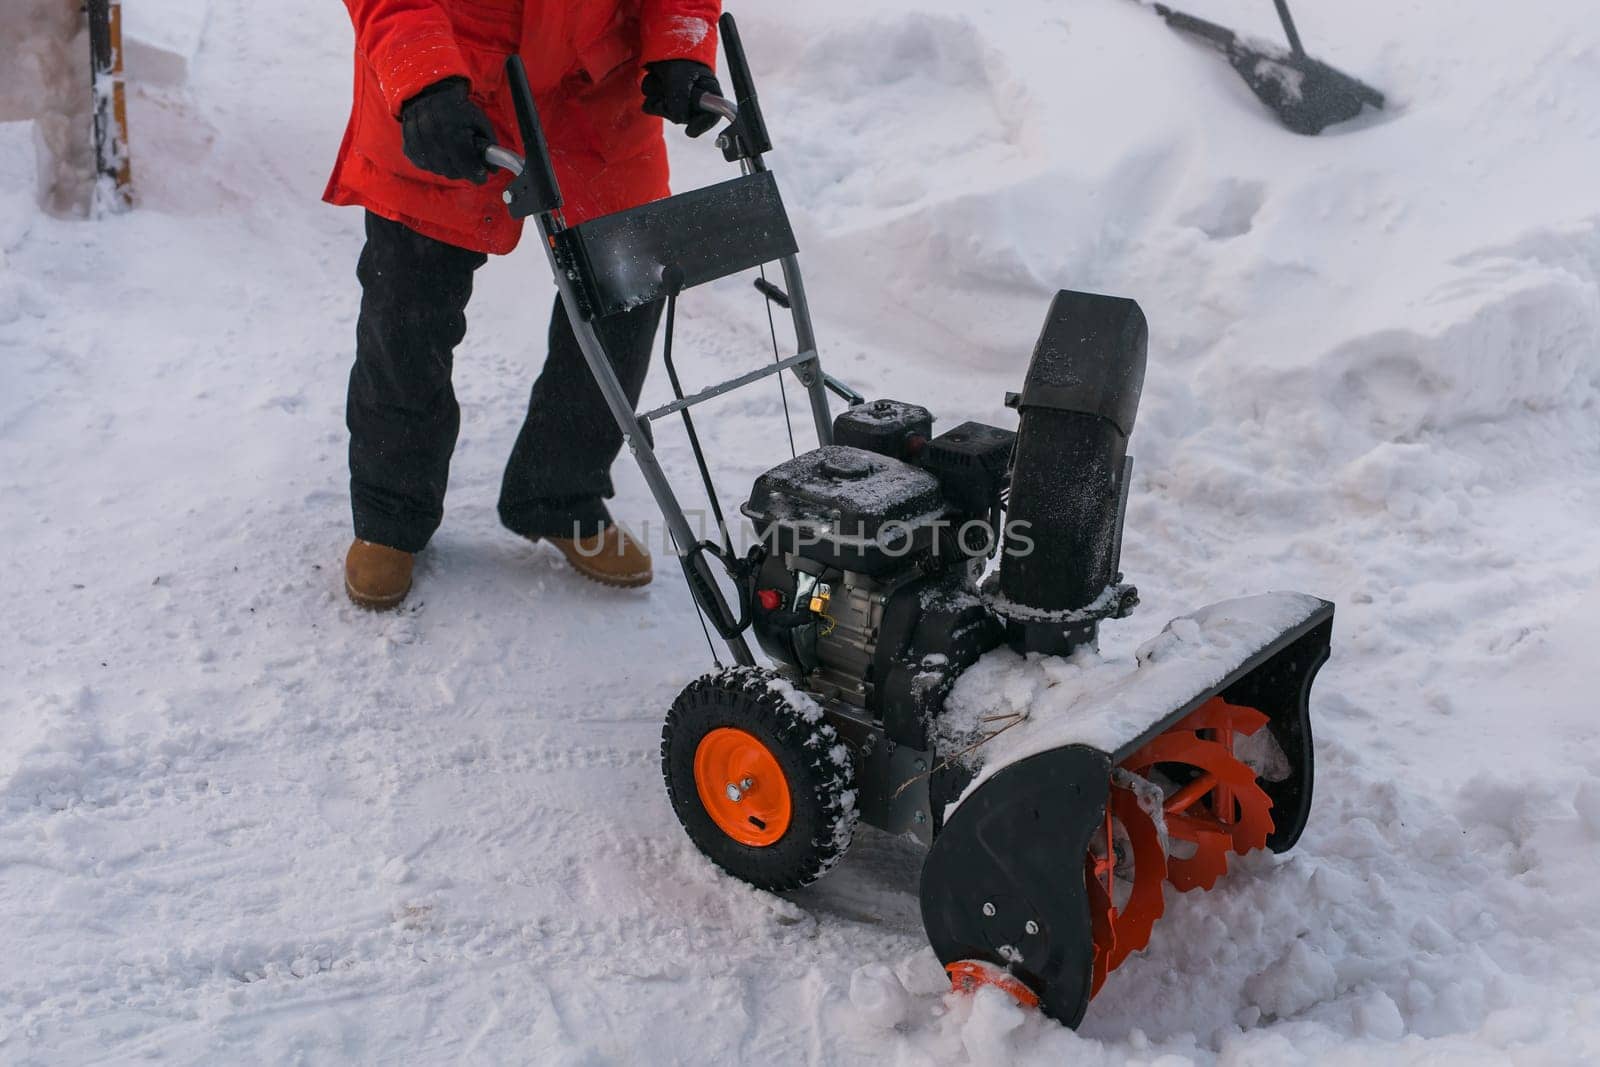 A man clear snow from backyard with snow blower close-up. Winter season and snow blower equipment close-up by Satura86